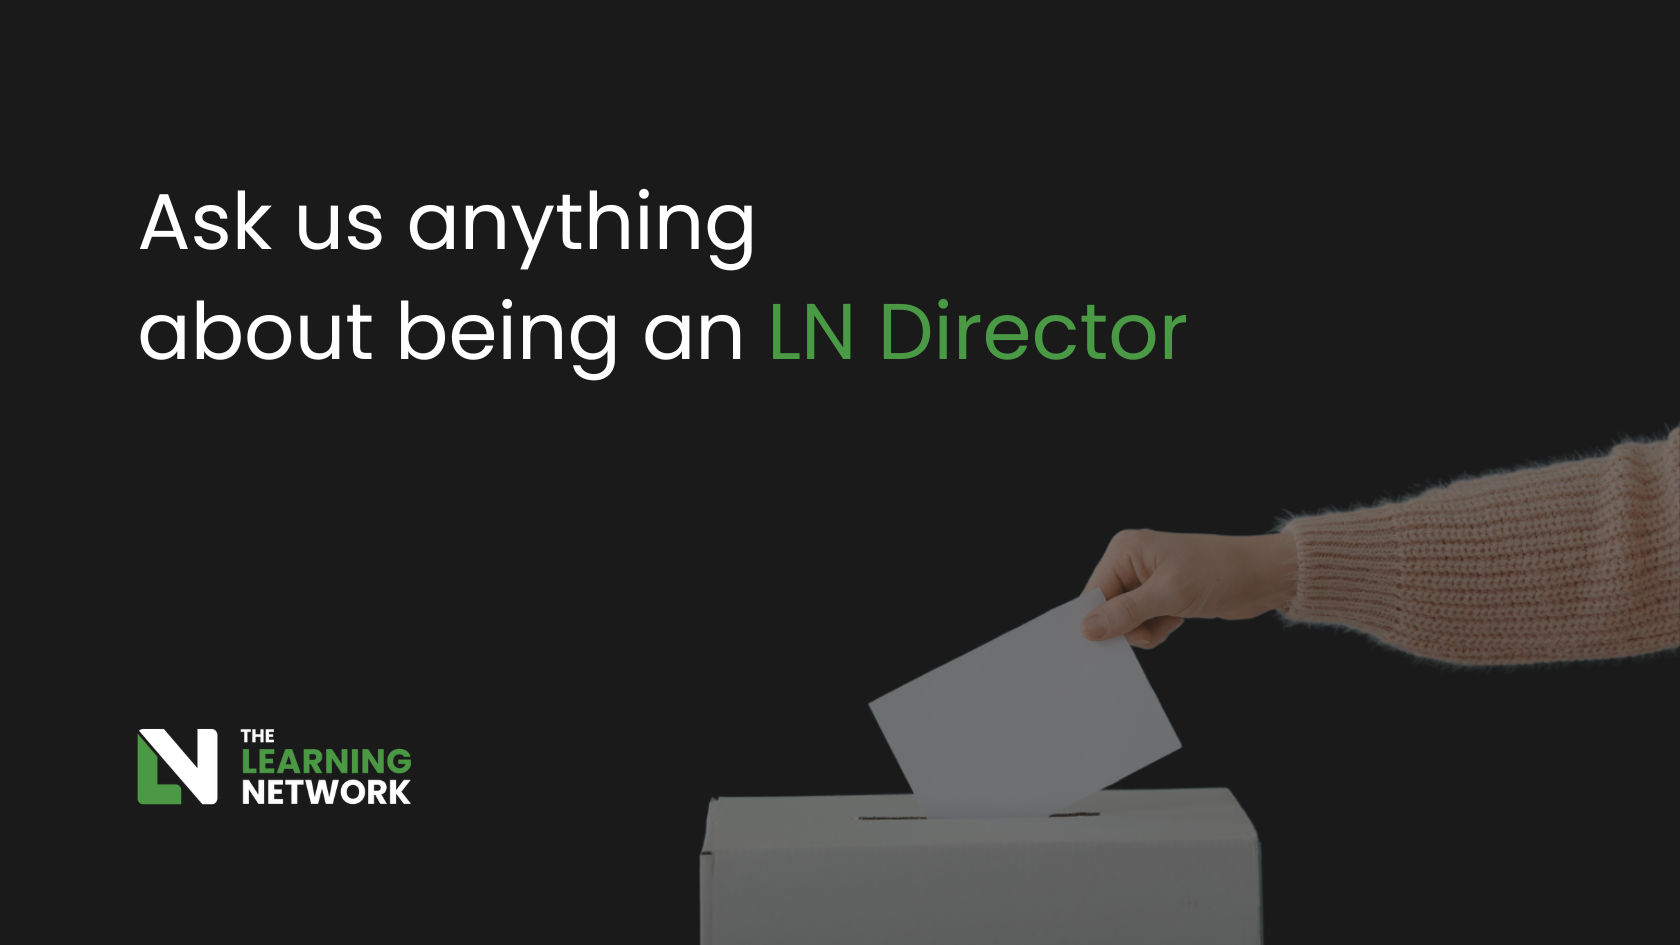 A woman's arm putting a vote in a box, shown against a dark background. Over which is written: ask us anything about being an LN Director.